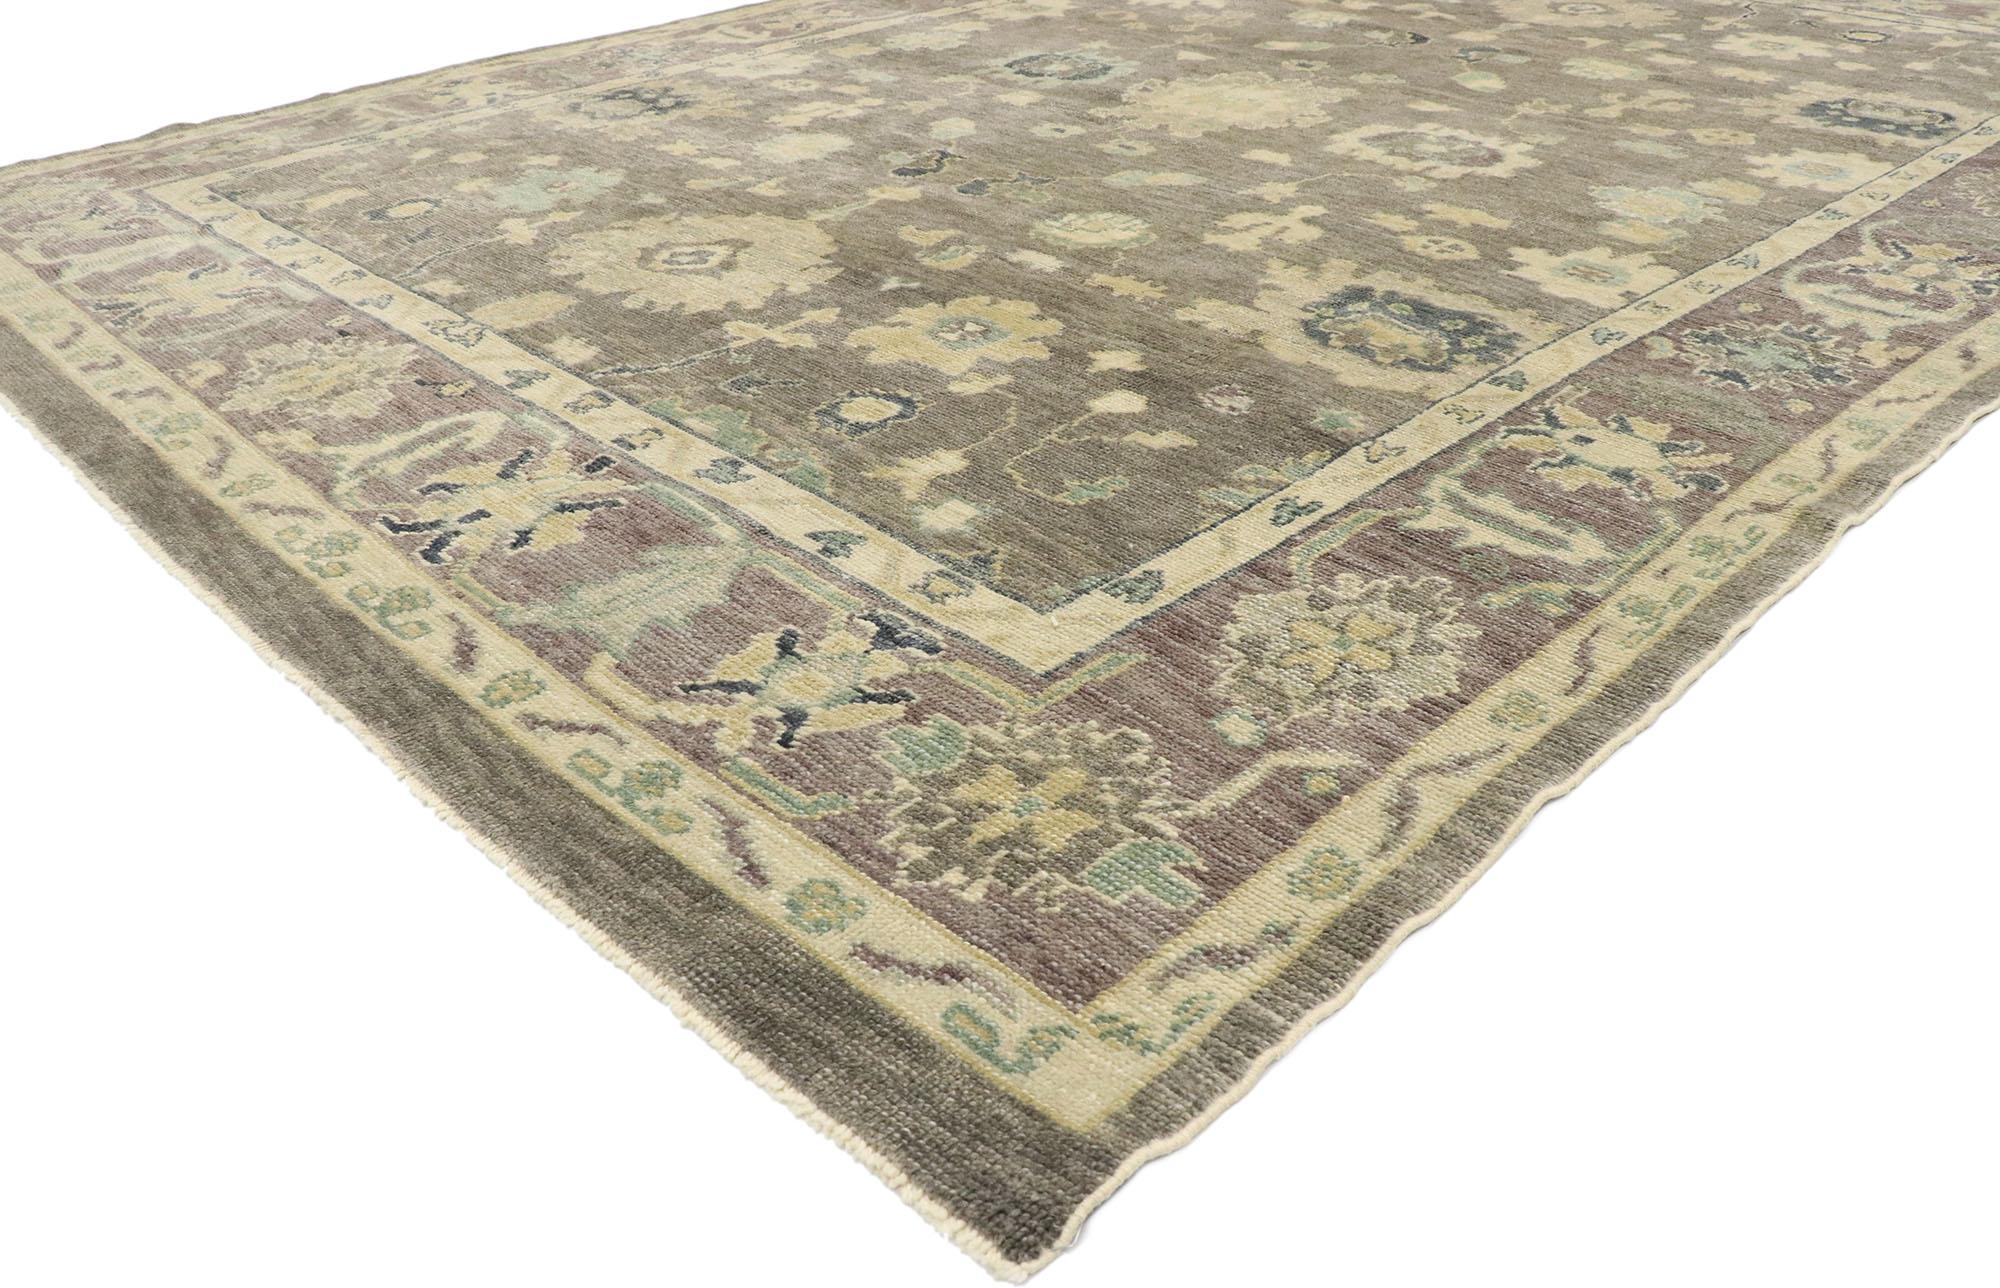 53413, new Contemporary Turkish Oushak rug with Modern Bungalow style. Warm and inviting with effortless beauty, this hand knotted wool contemporary Turkish Oushak rug charms with ease and beautifully embodies the fine craftsmanship of modern